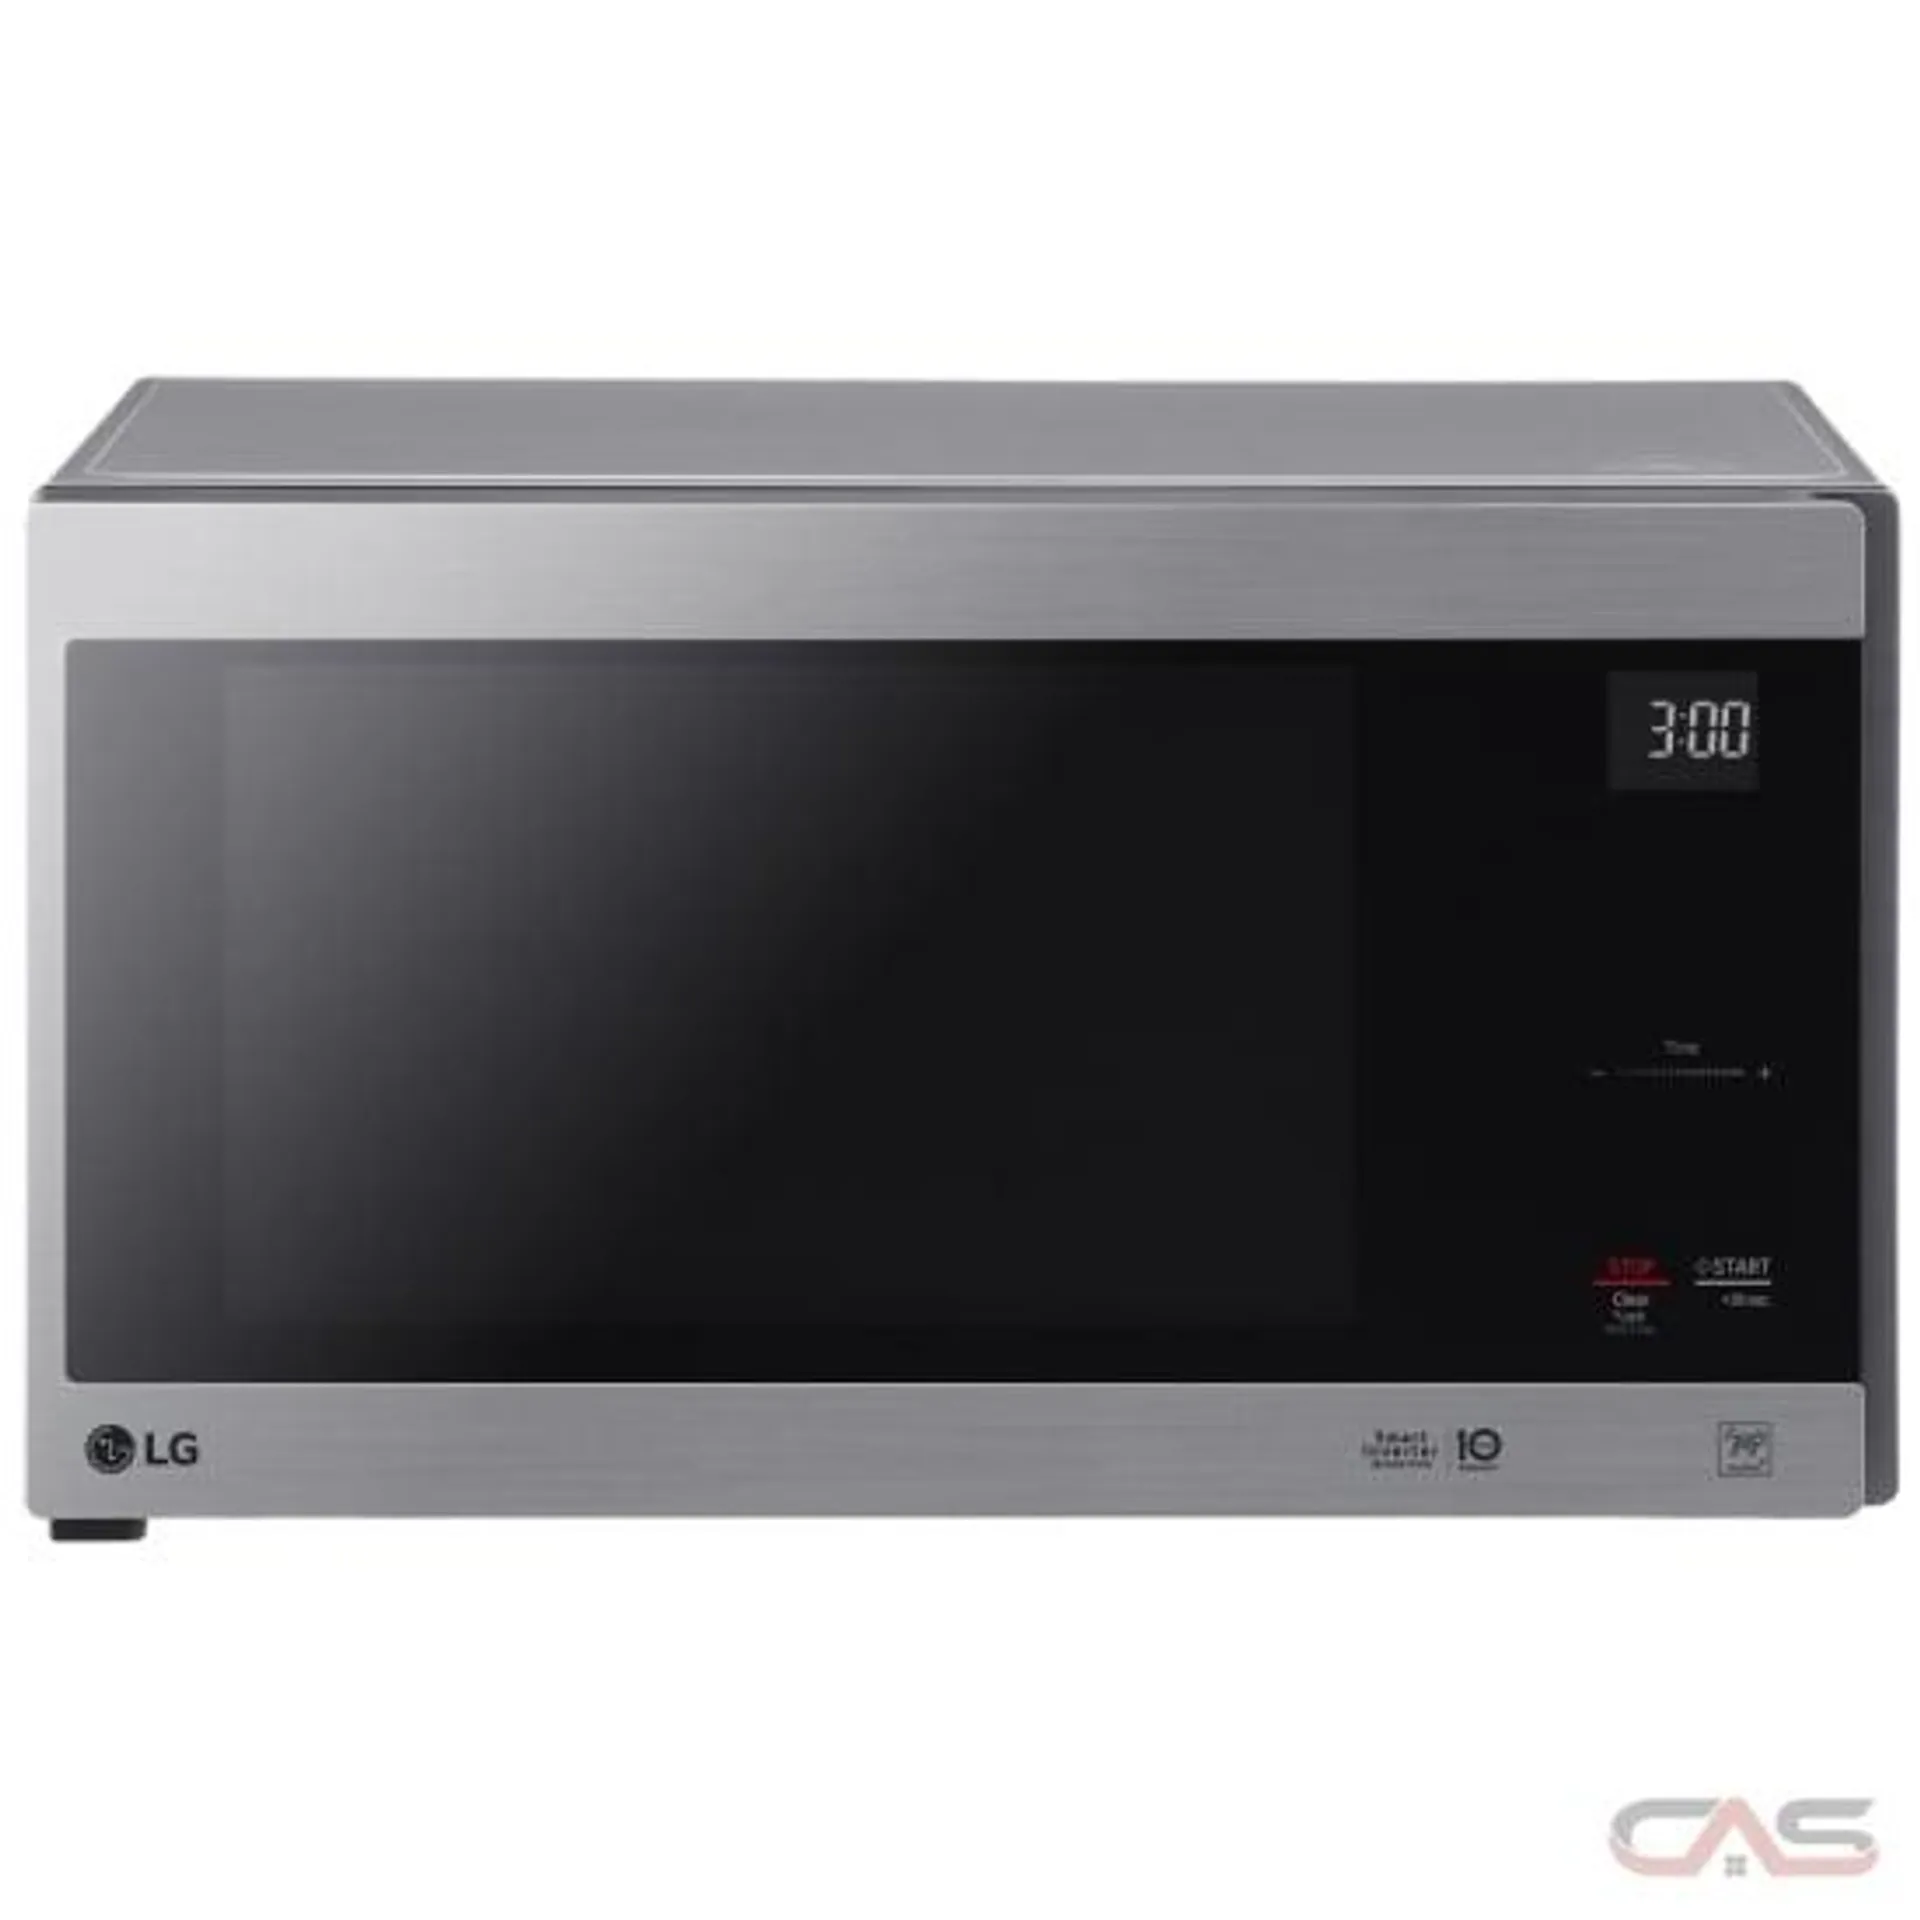 LG LMC1575ST Countertop Microwave, 1.5 cu. ft. Capacity, 1200W Watts, Stainless Steel colour